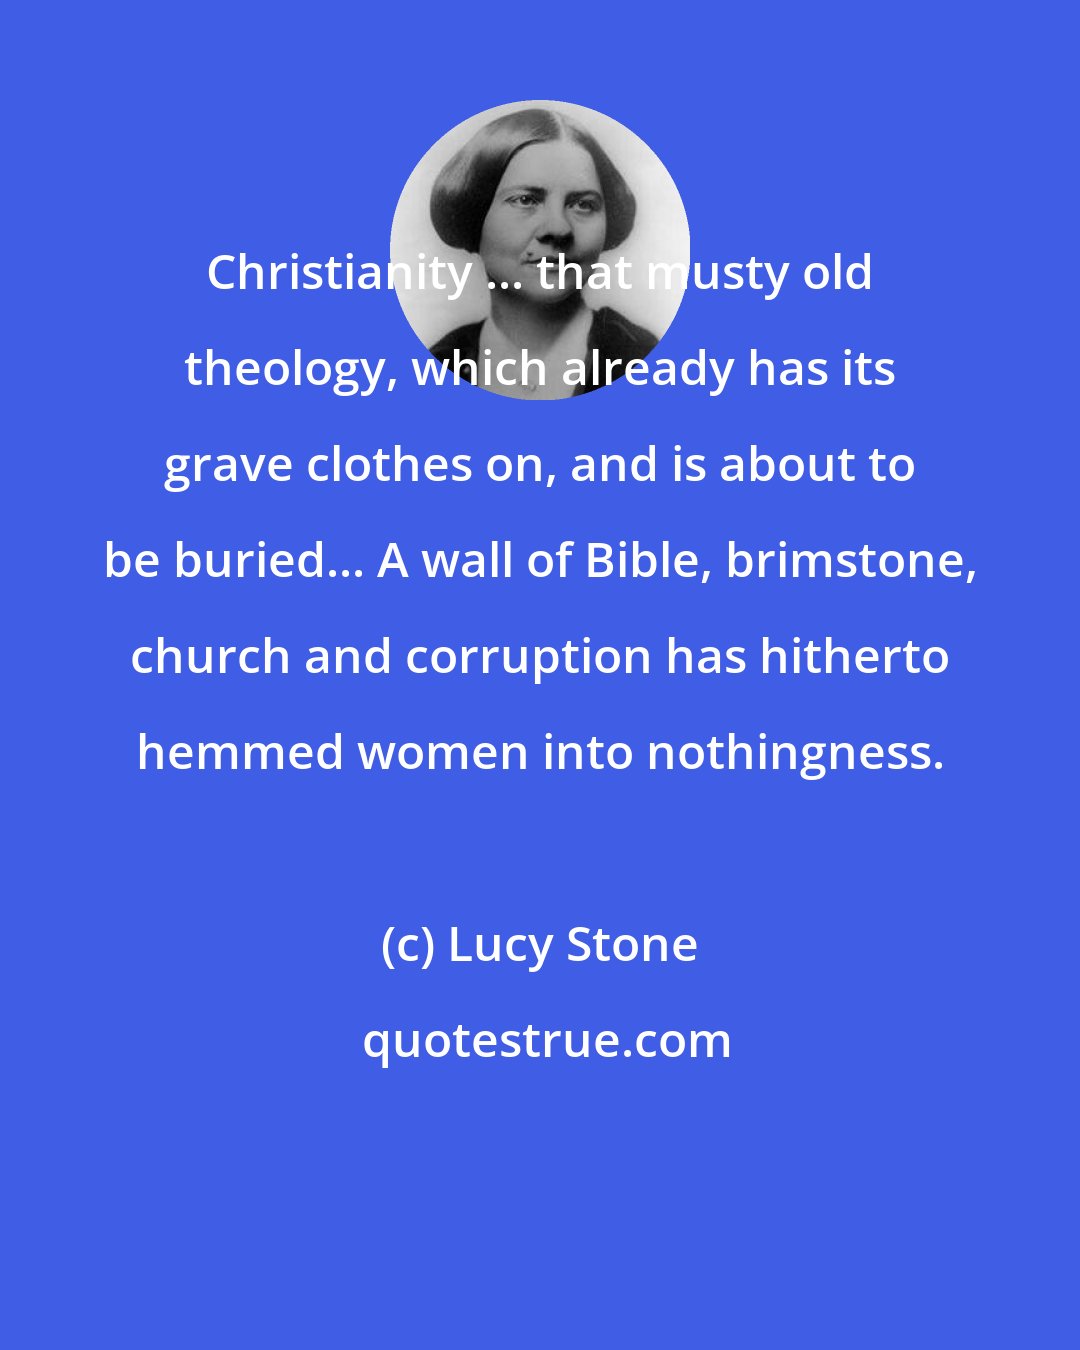 Lucy Stone: Christianity ... that musty old theology, which already has its grave clothes on, and is about to be buried... A wall of Bible, brimstone, church and corruption has hitherto hemmed women into nothingness.